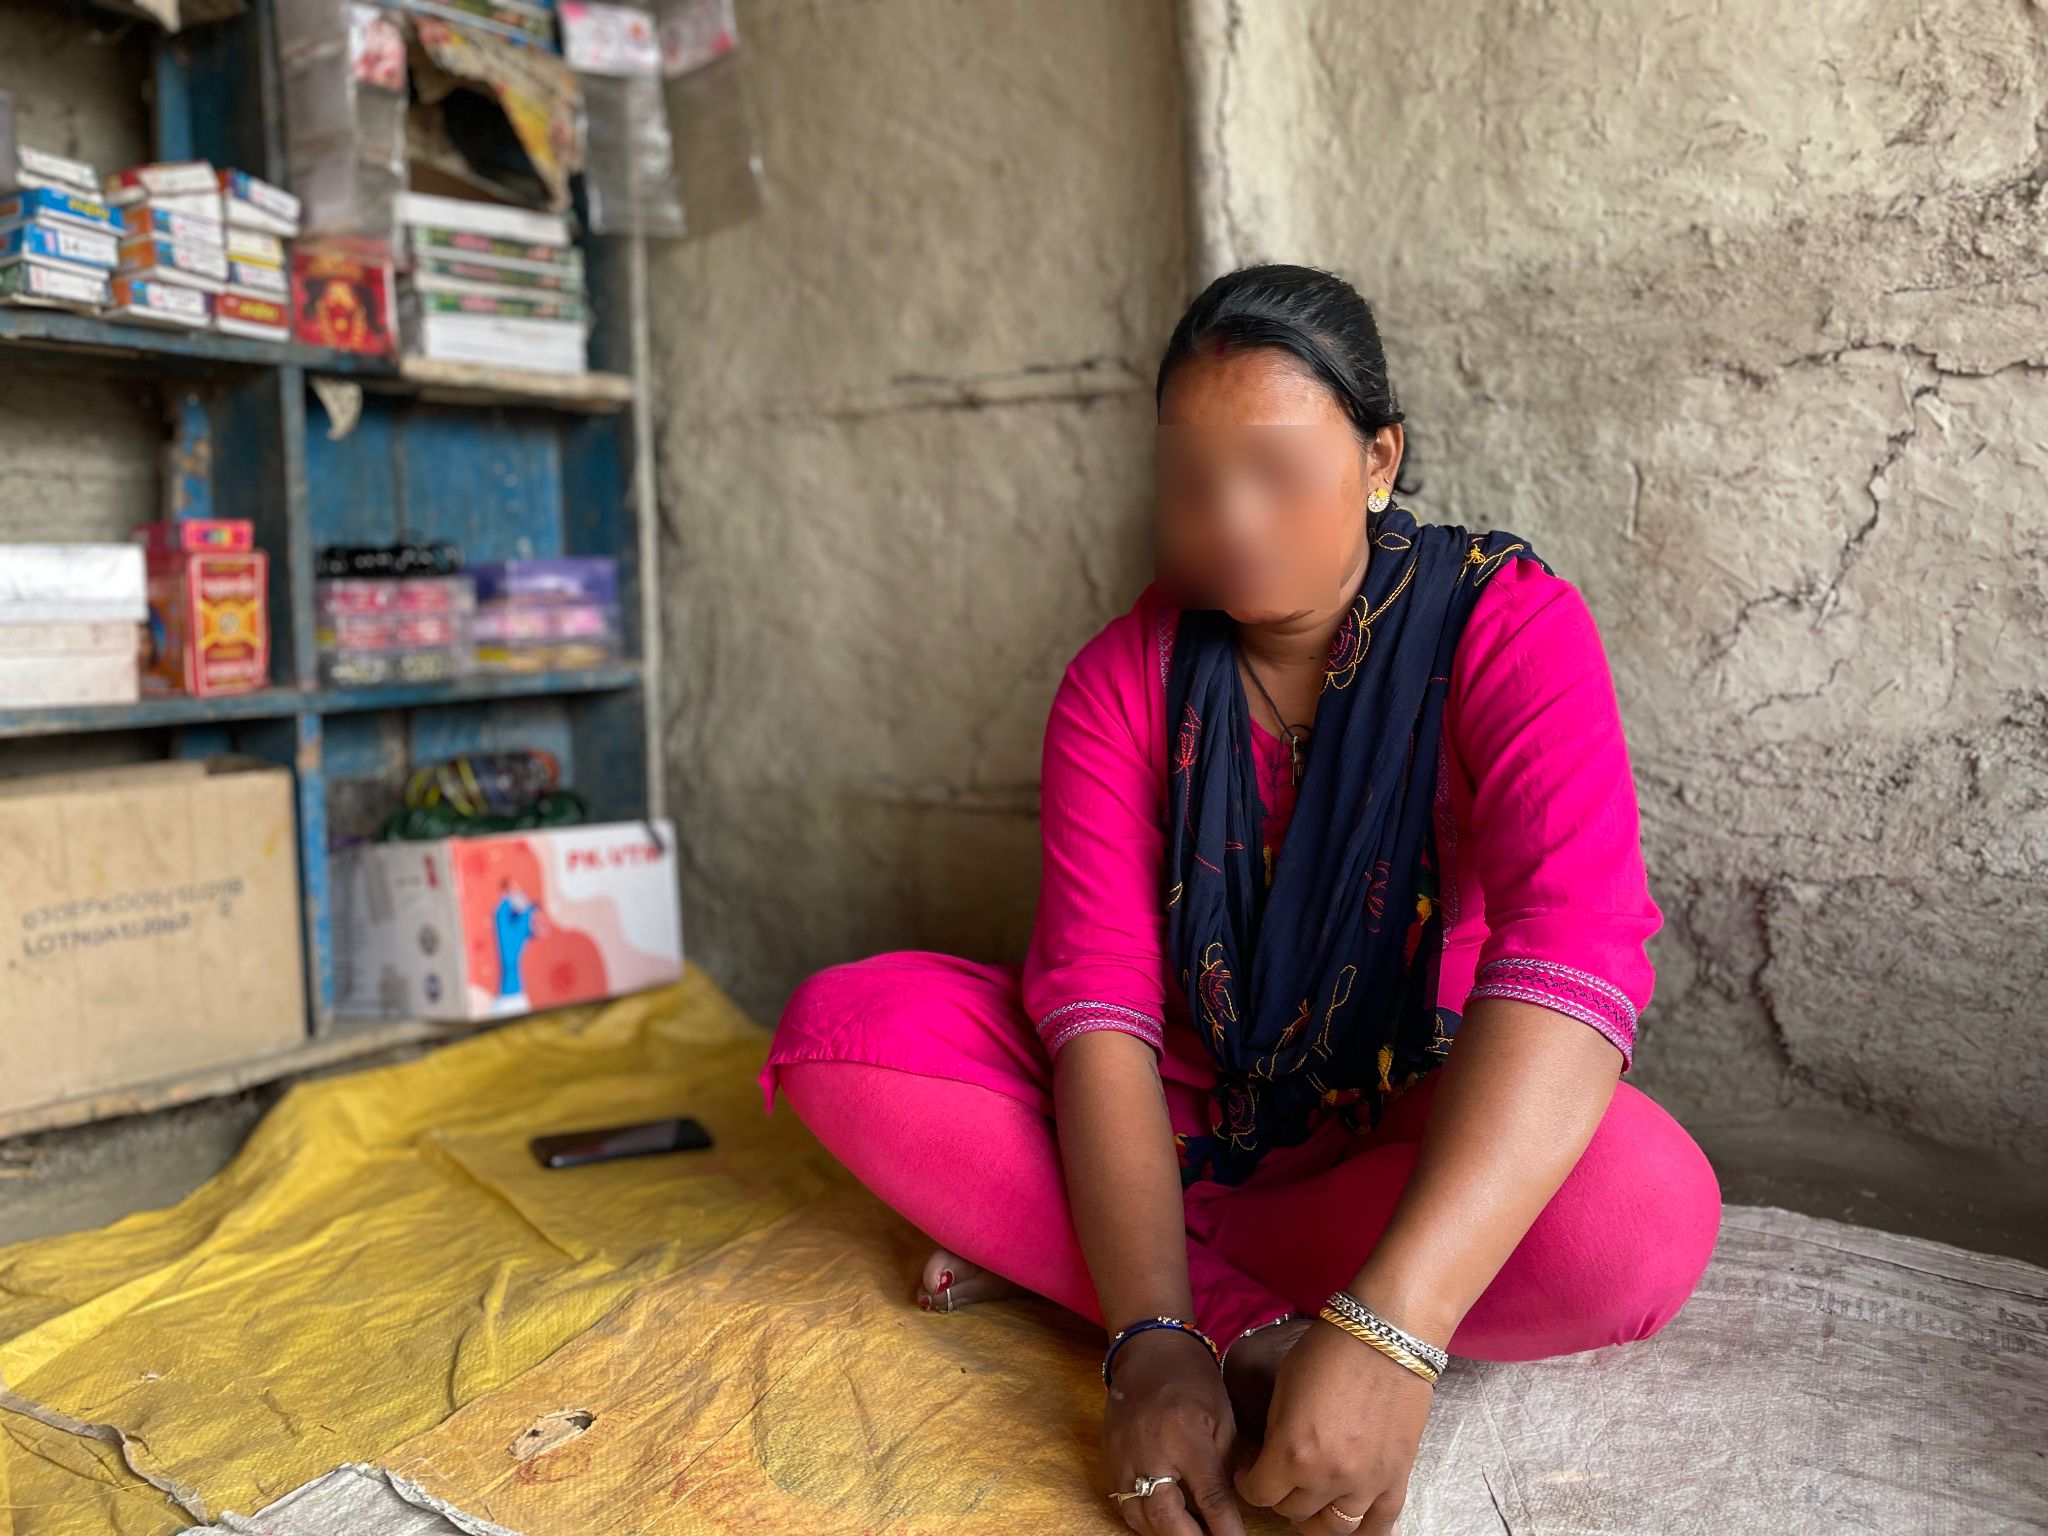 Pritha Devi (pseudonym), sat crossed legged in pink clothing. Face blurred to protect her identity